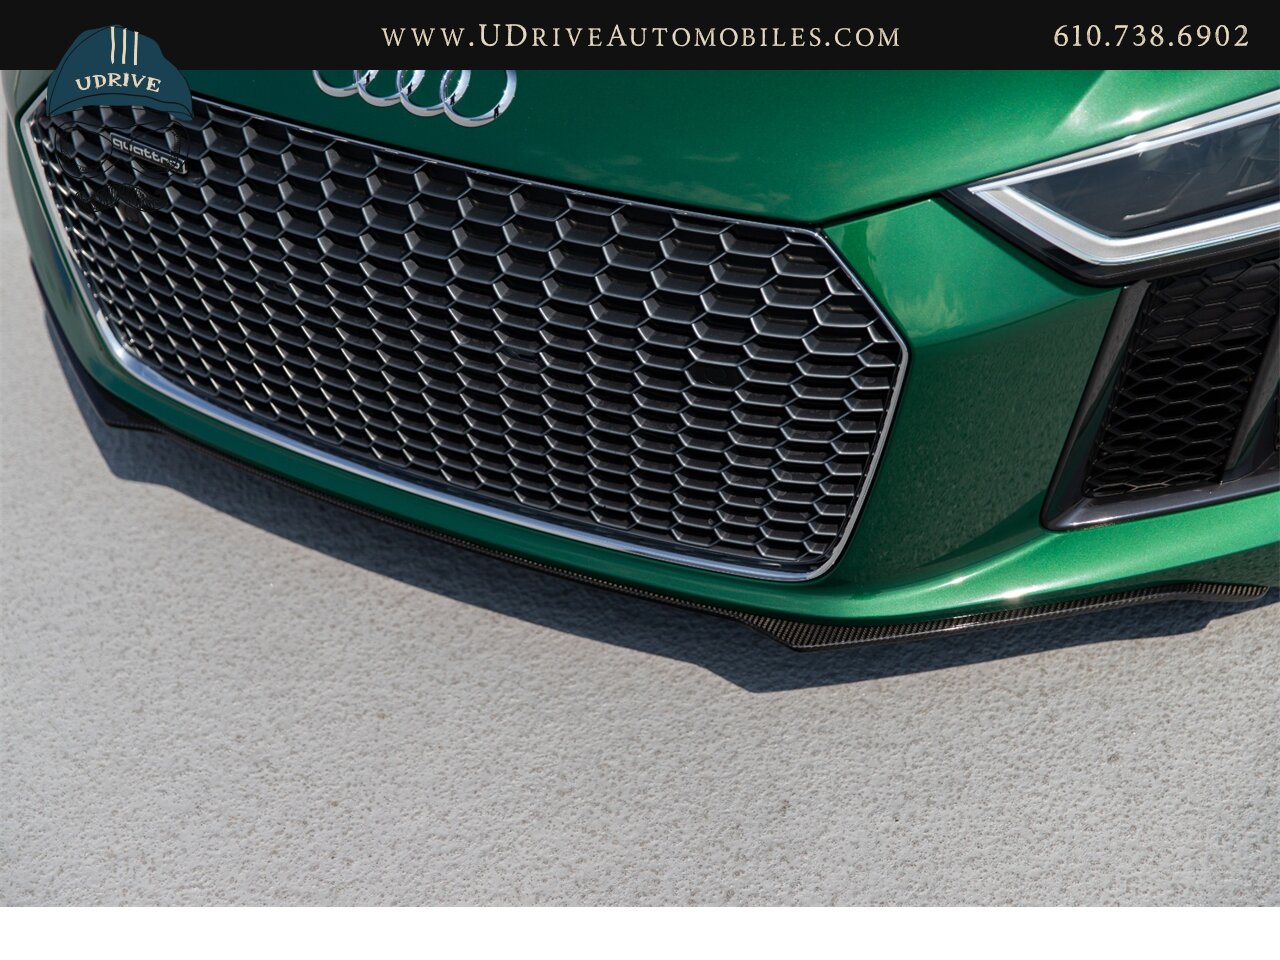 2017 Audi R8 Audi Exclusive Avocado Green Vermont Brown Leather  Diamond Stitching V10 Carbon Fiber - Photo 16 - West Chester, PA 19382